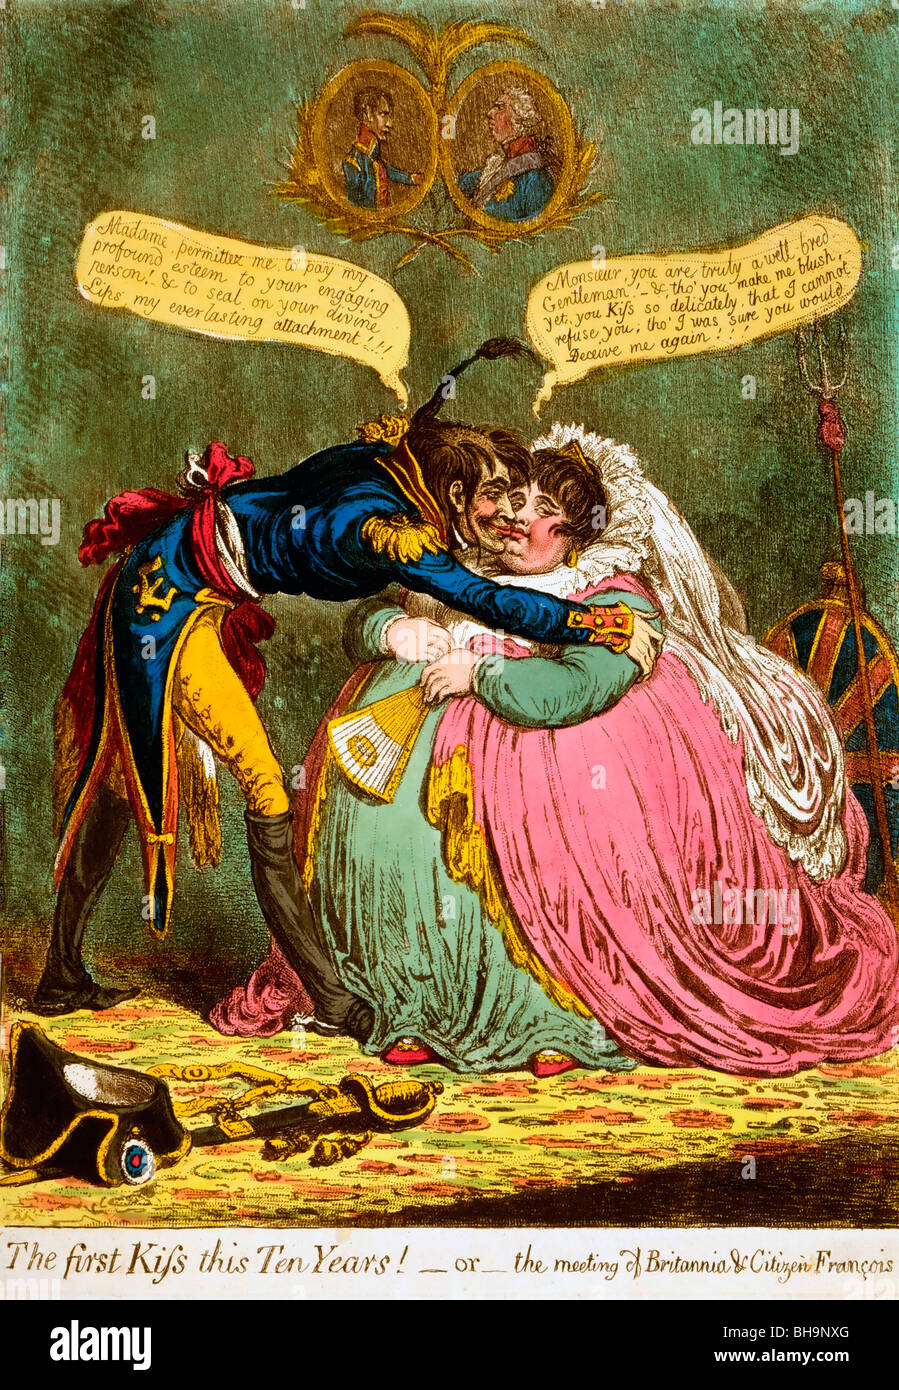 The first Kiss this Ten Years! - or - the meeting of Britannia & Citizen Francois, Political Cartoon, 1803 Stock Photo